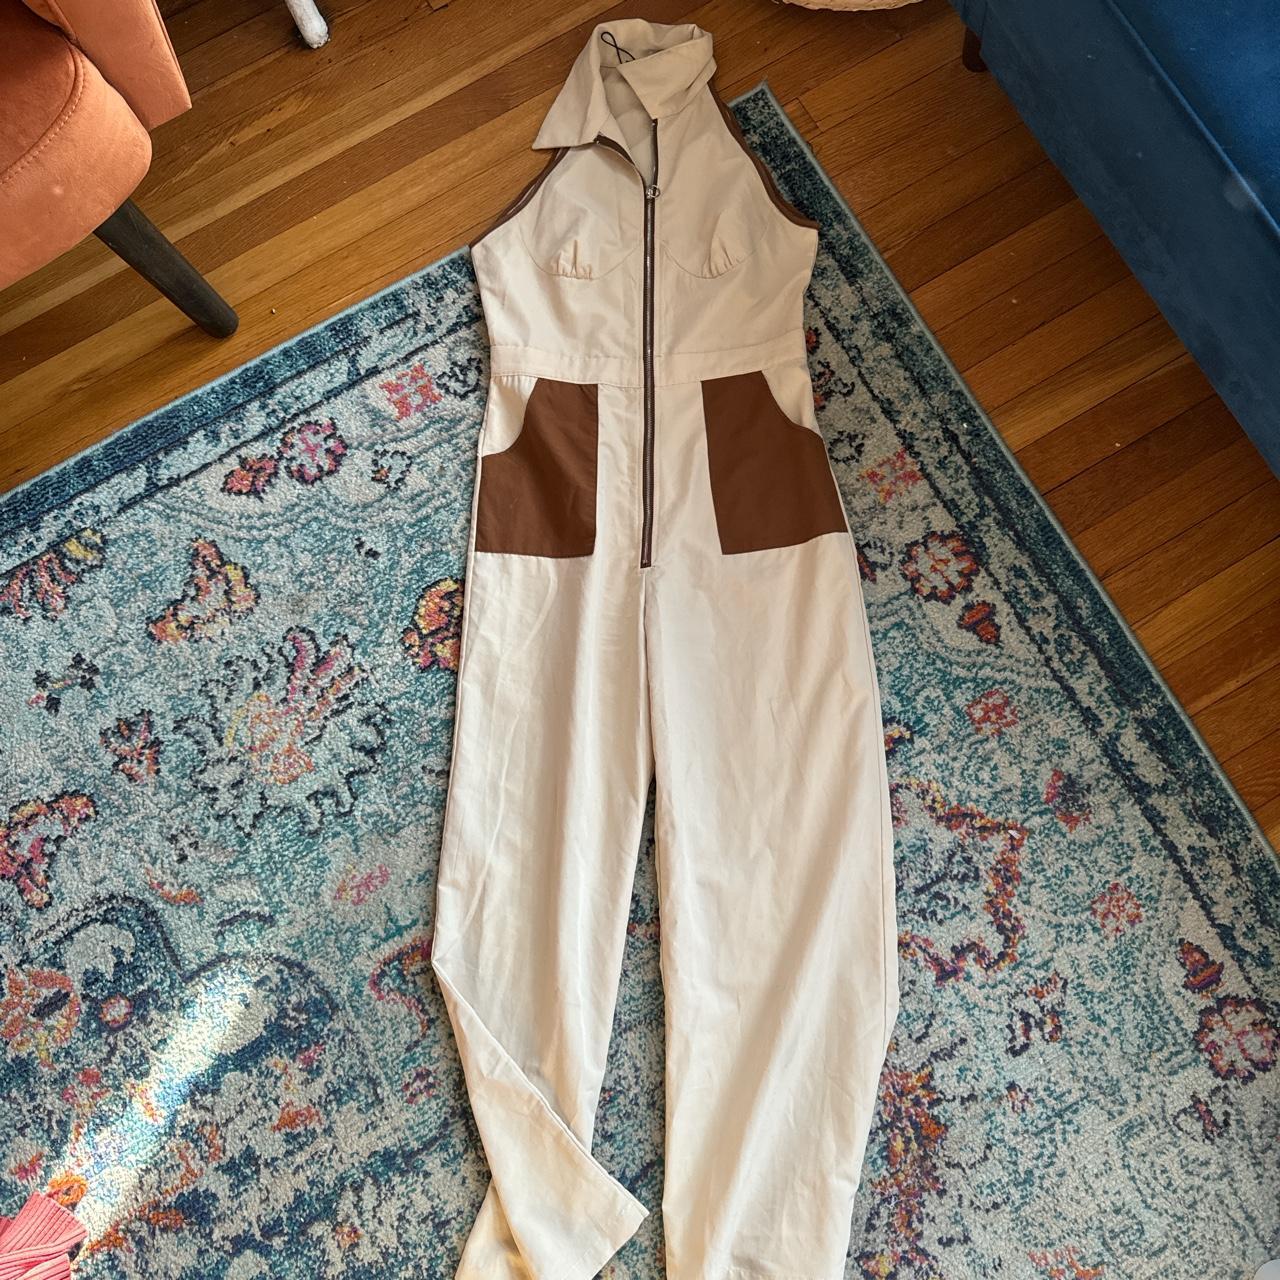 Cider jumpsuit Tan/cream with brown accents.... - Depop